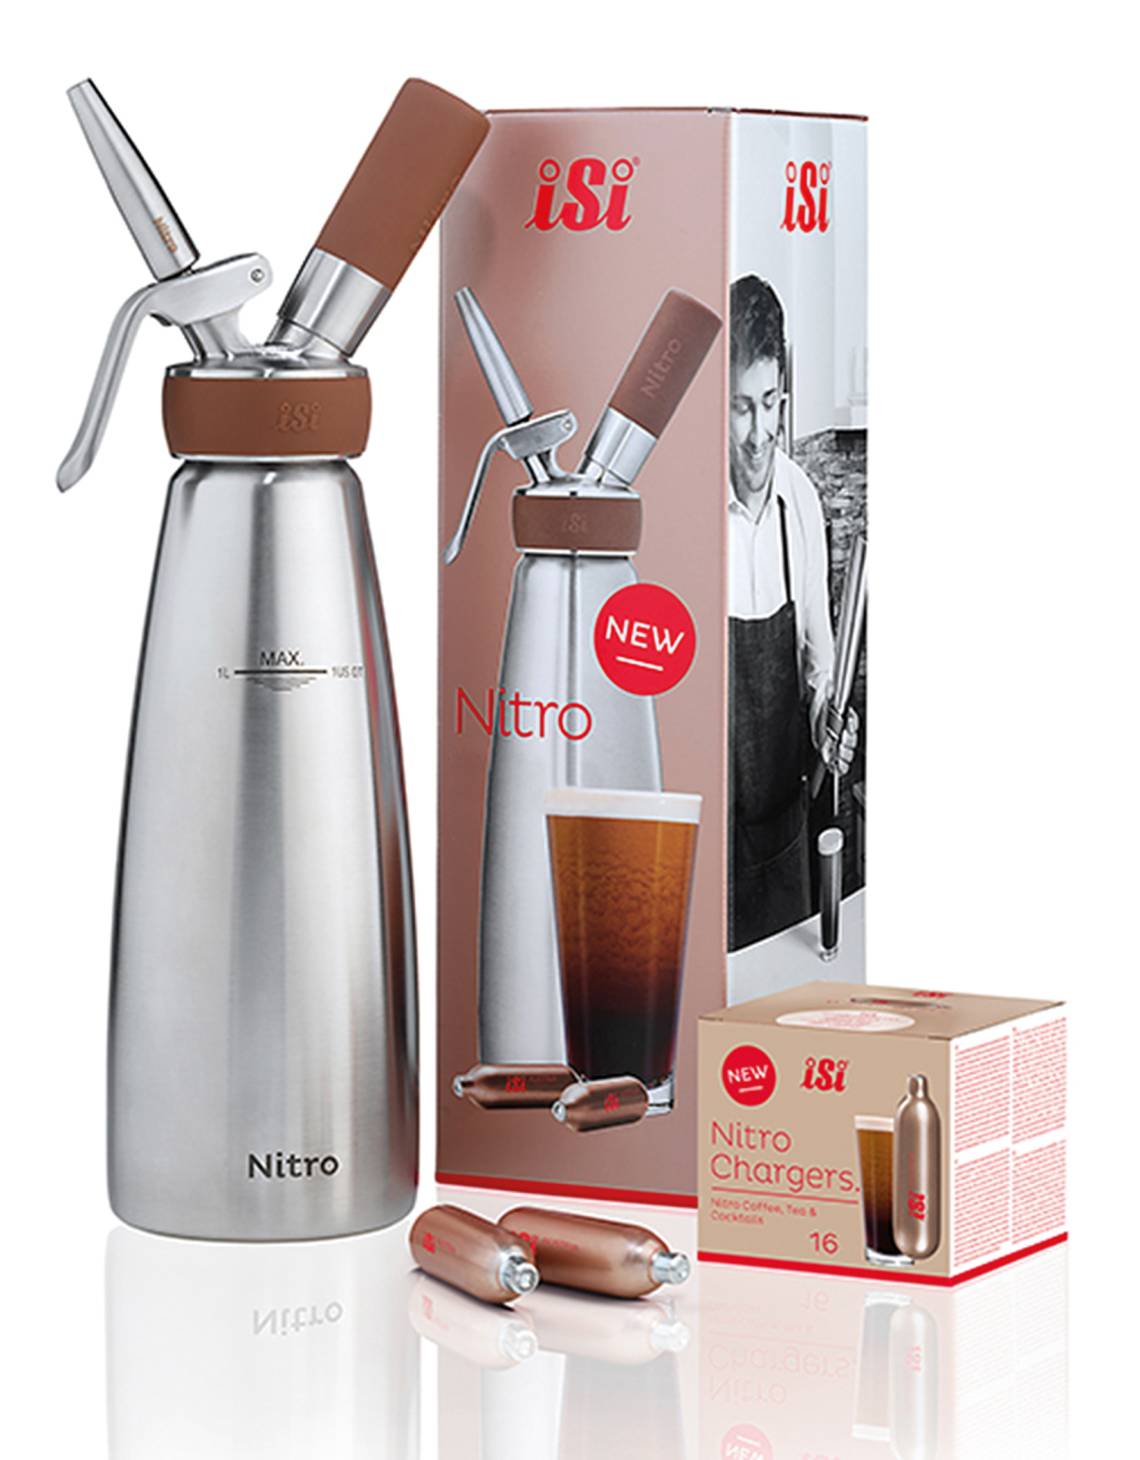 iSi - Nitro System mit Verpackung